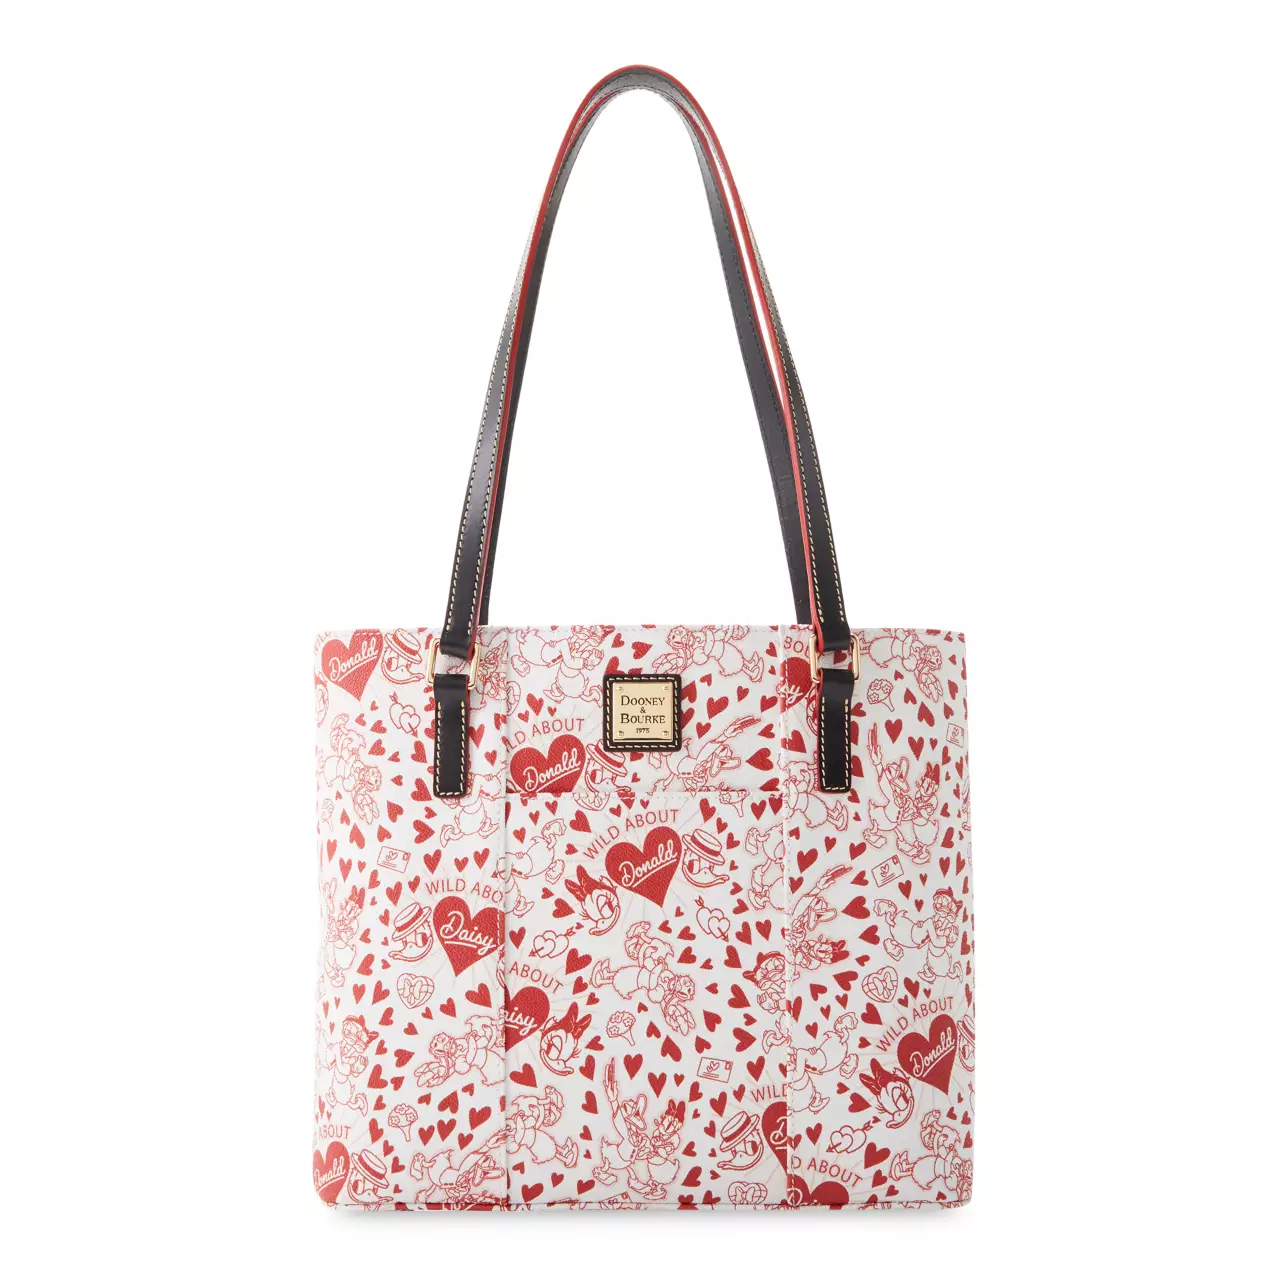 Donald and Daisy Duck Dooney & Bourke Tote Bag